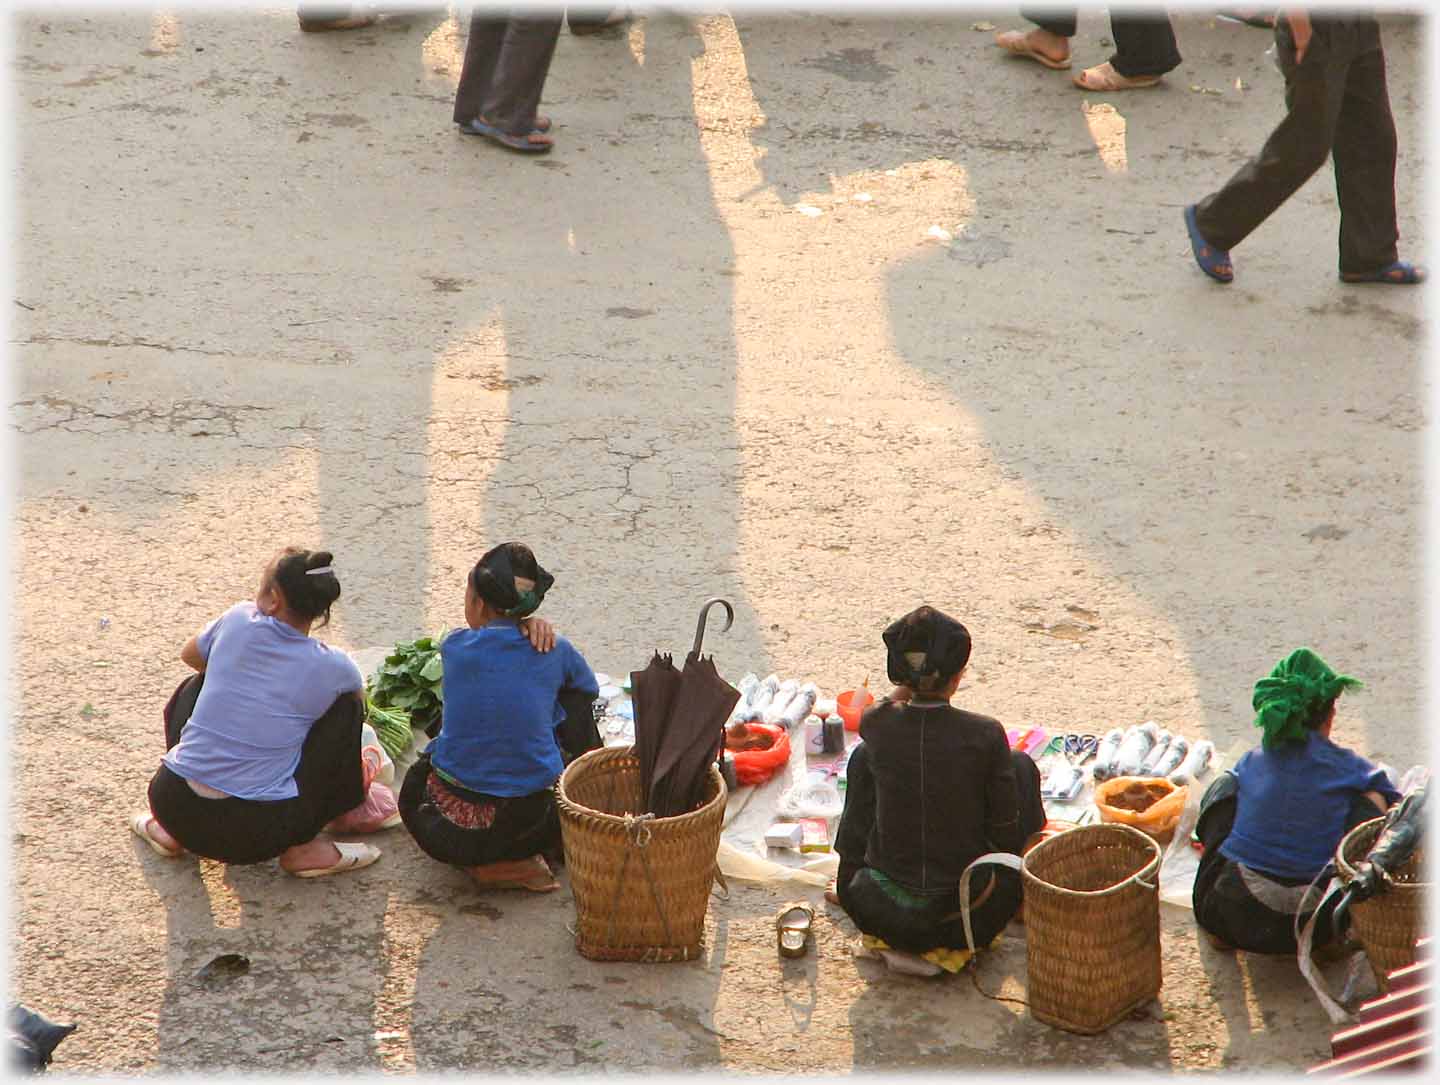 Four women sitting at the roadside with goods laid out in front of them, seen from above and behind.